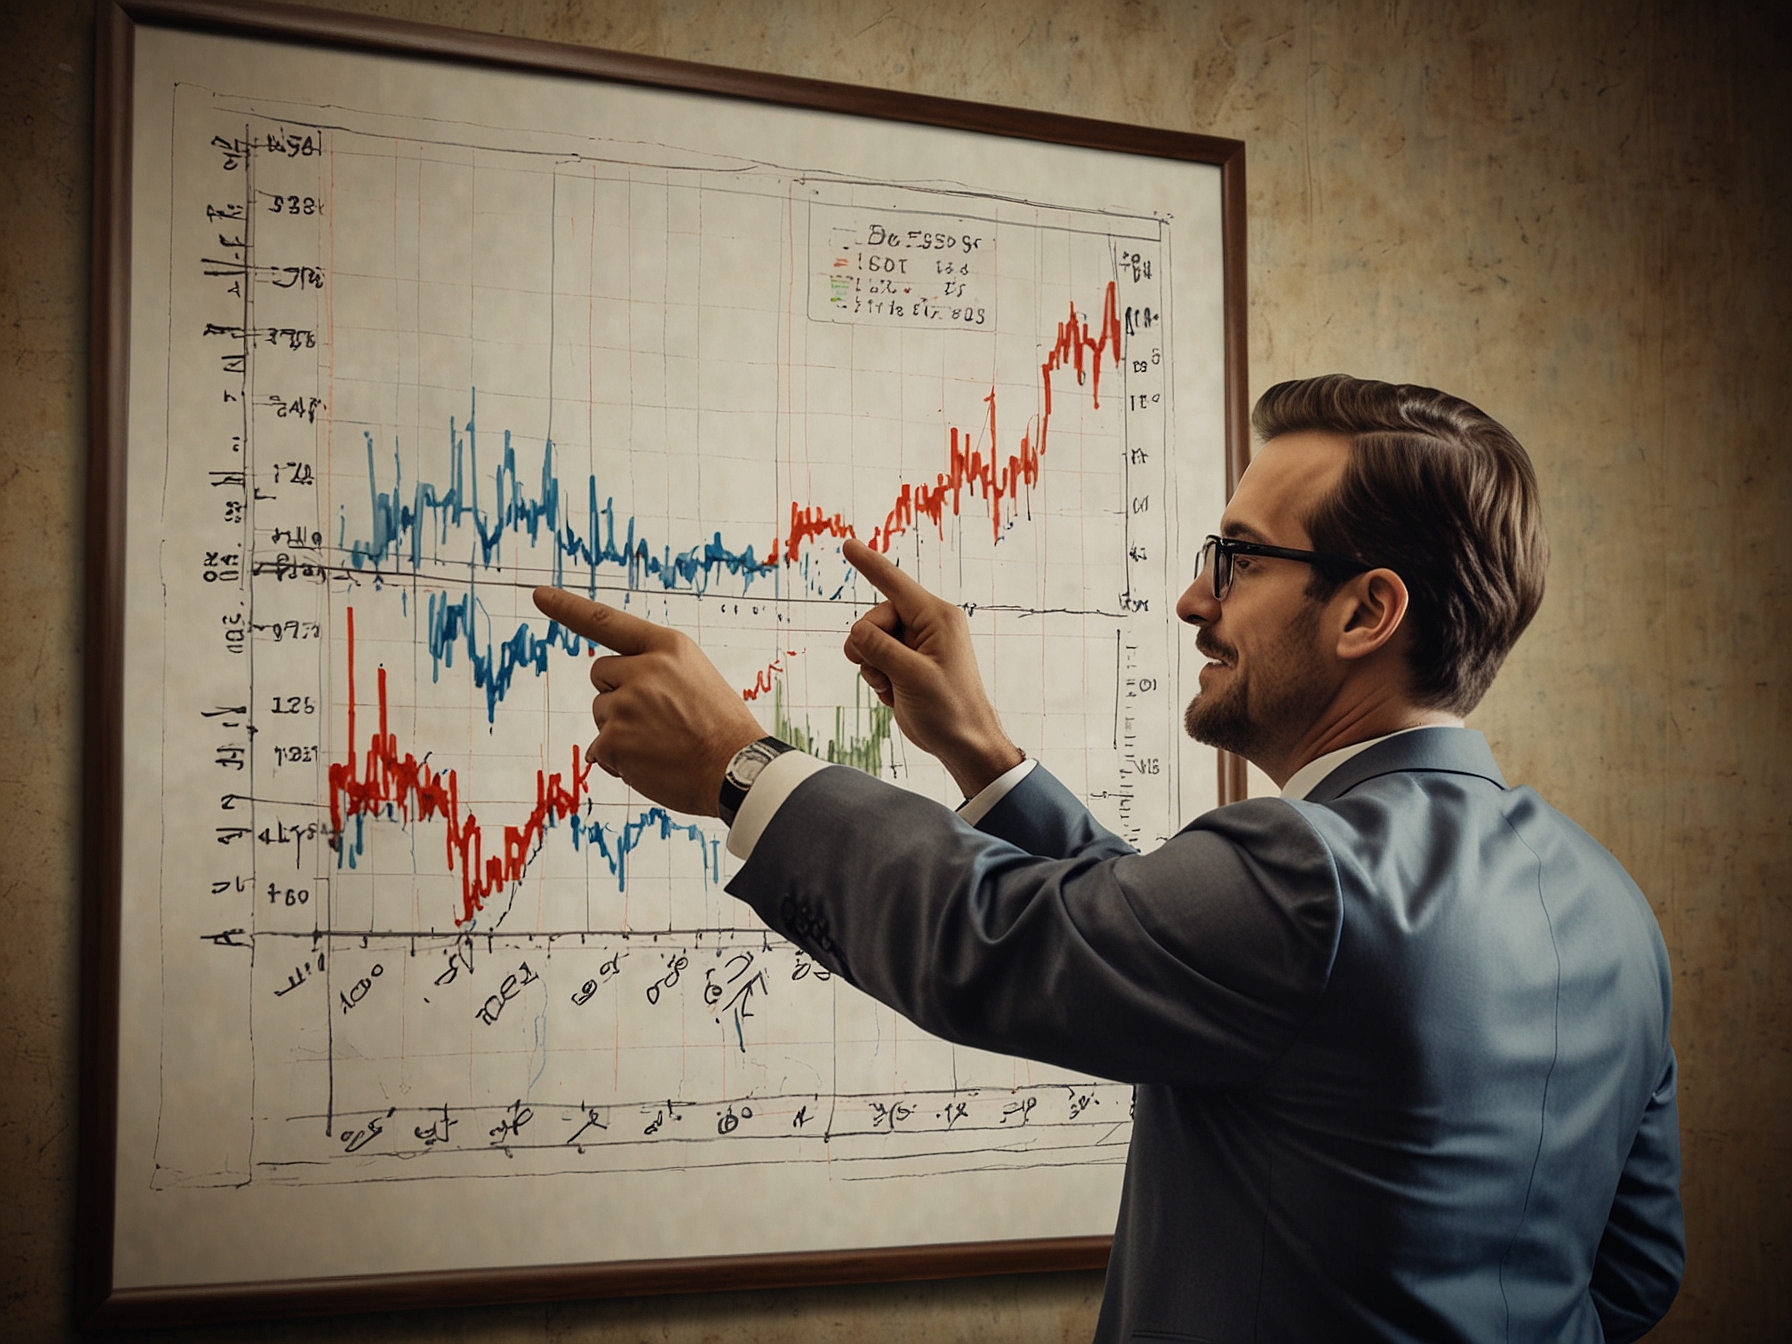 Illustration of an investor pointing at a chart displaying the calculation to achieve $1,000 in annual dividend income from Enbridge Inc. stock, emphasizing the 7.6% yield.